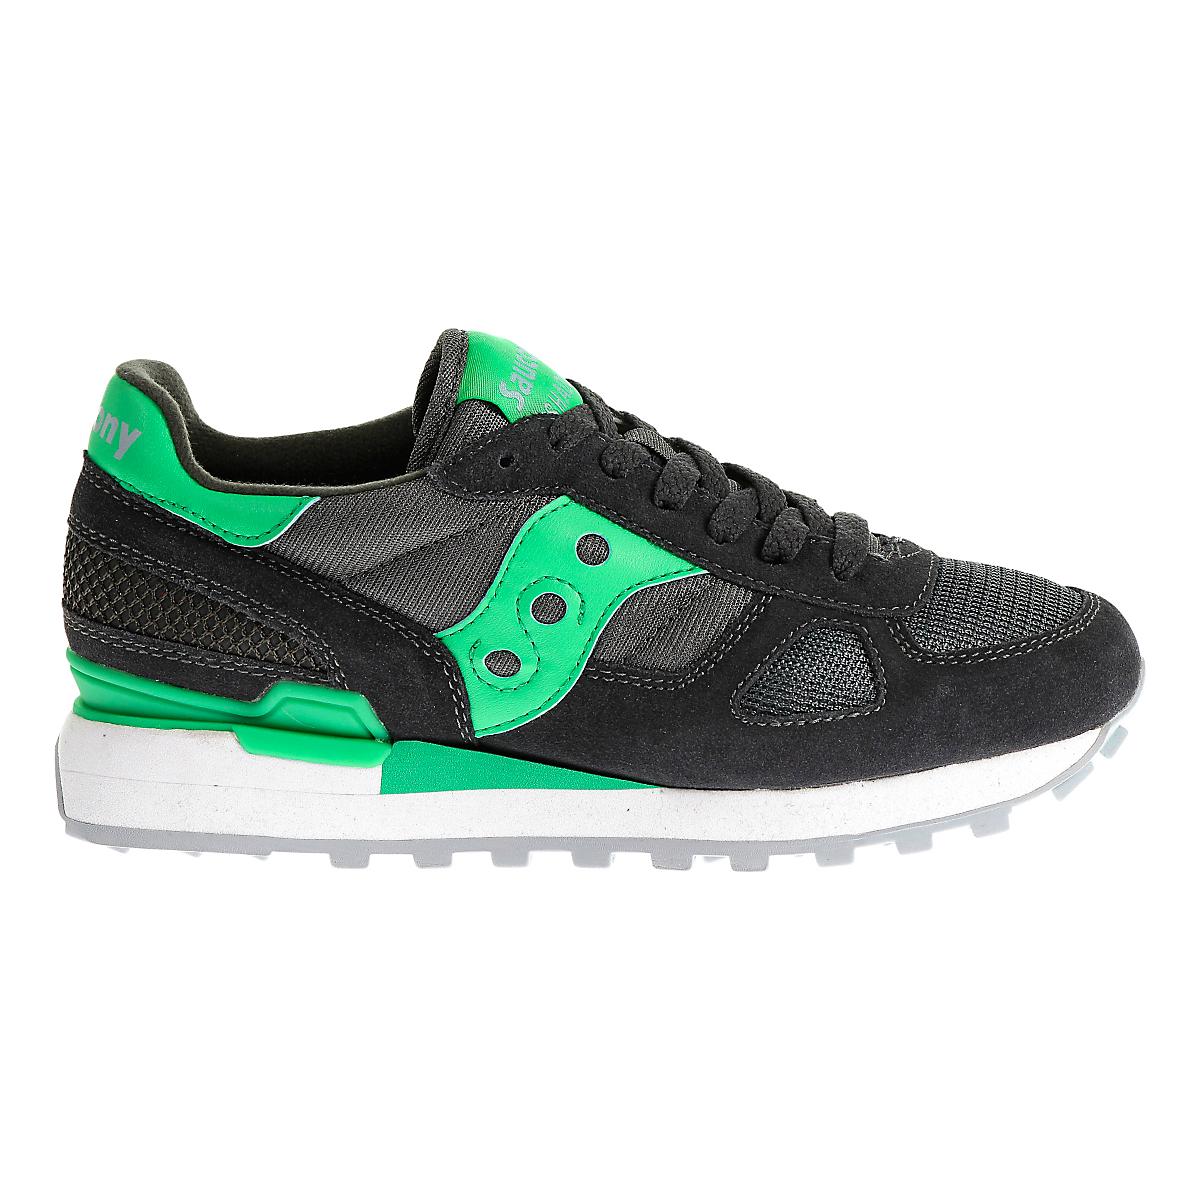 Womens Saucony Shadow Original Casual Shoe at Road Runner Sports